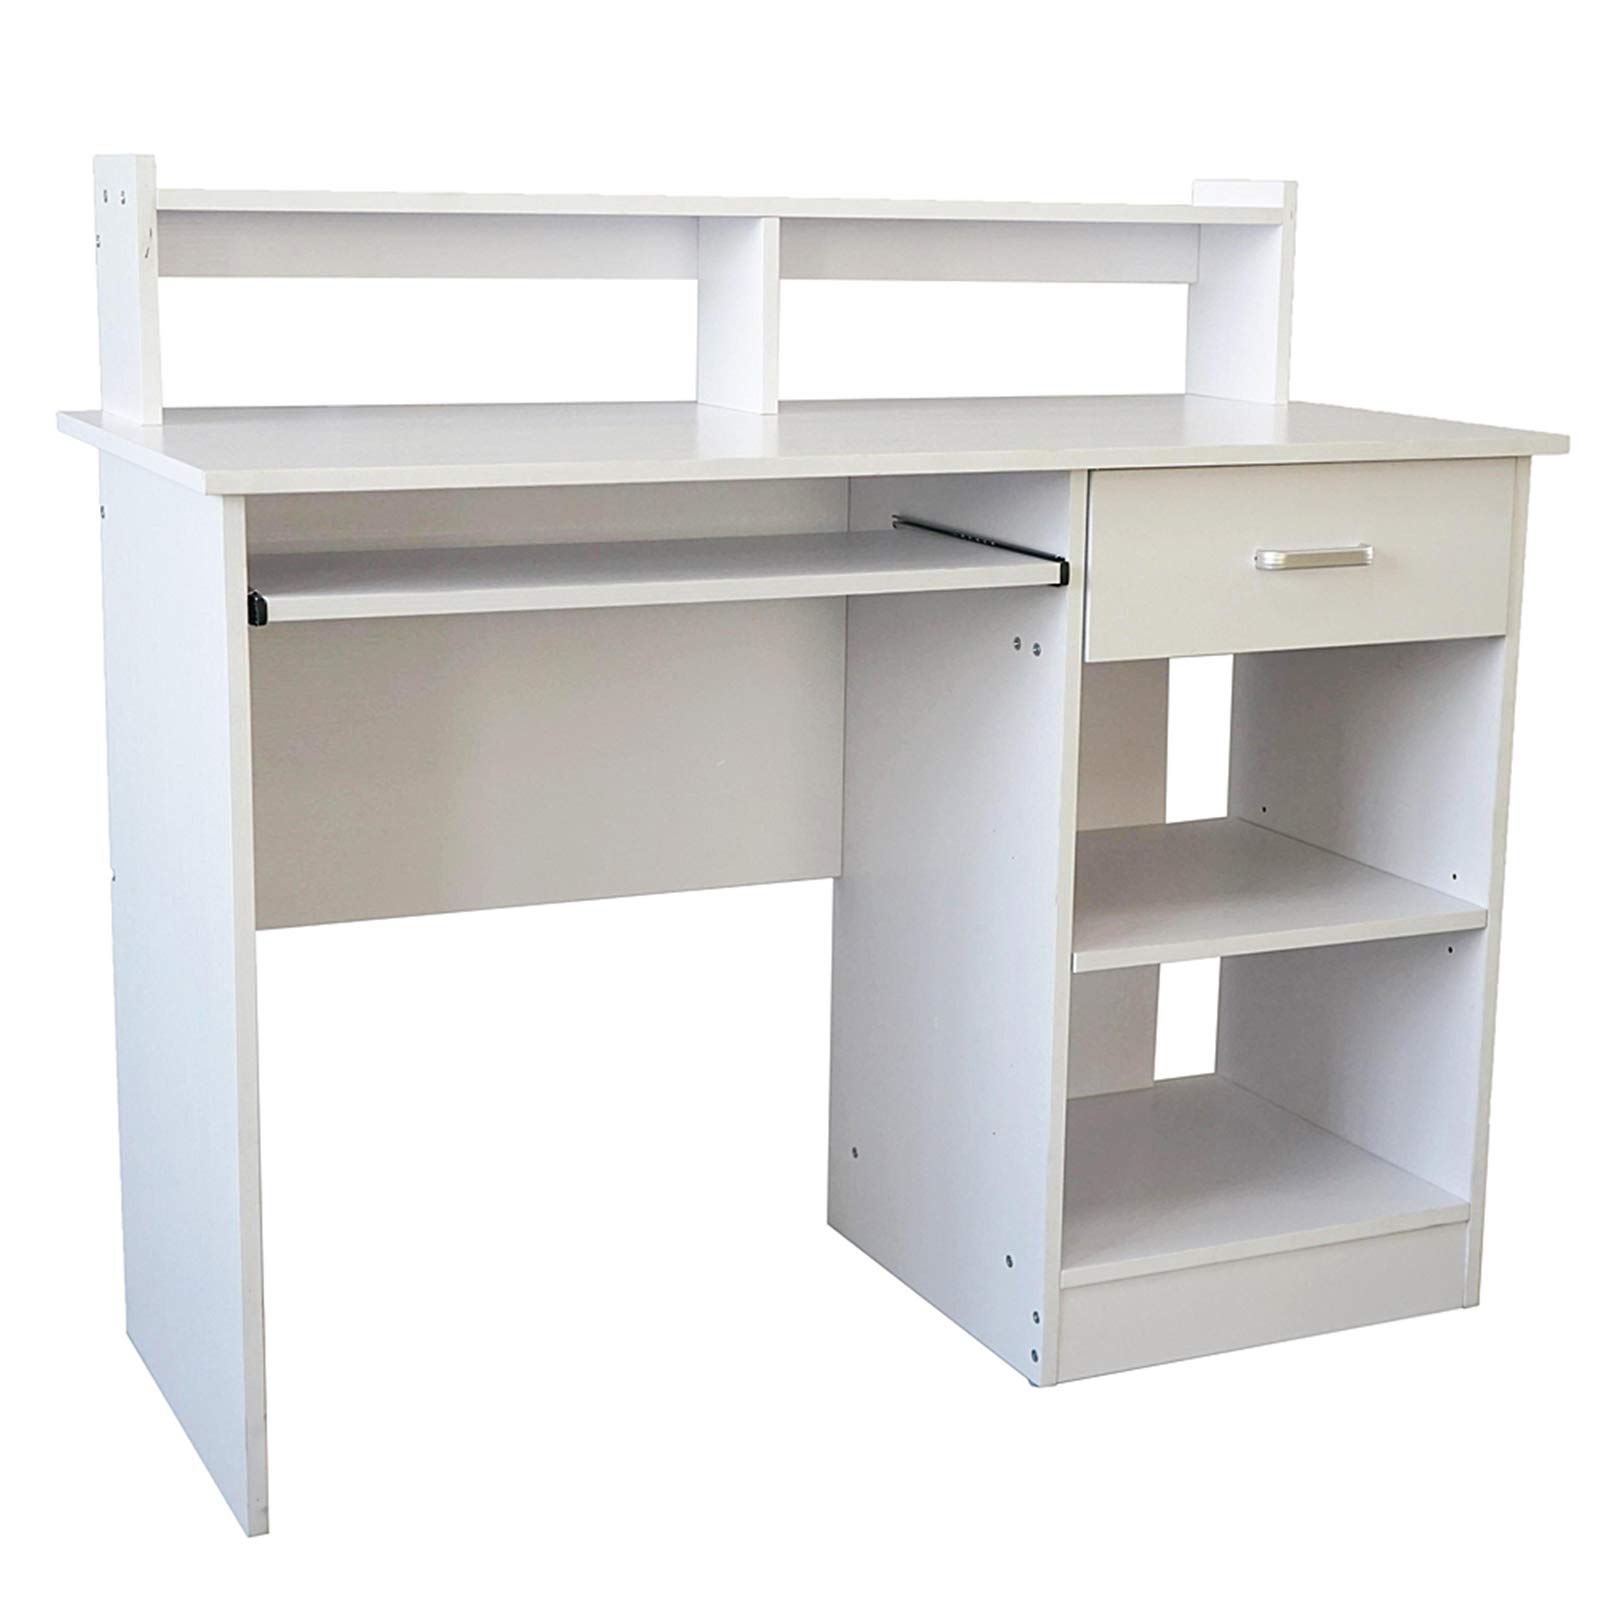 WISCLASS General Style White Computer Desk with Keyboard Tray and Drawers